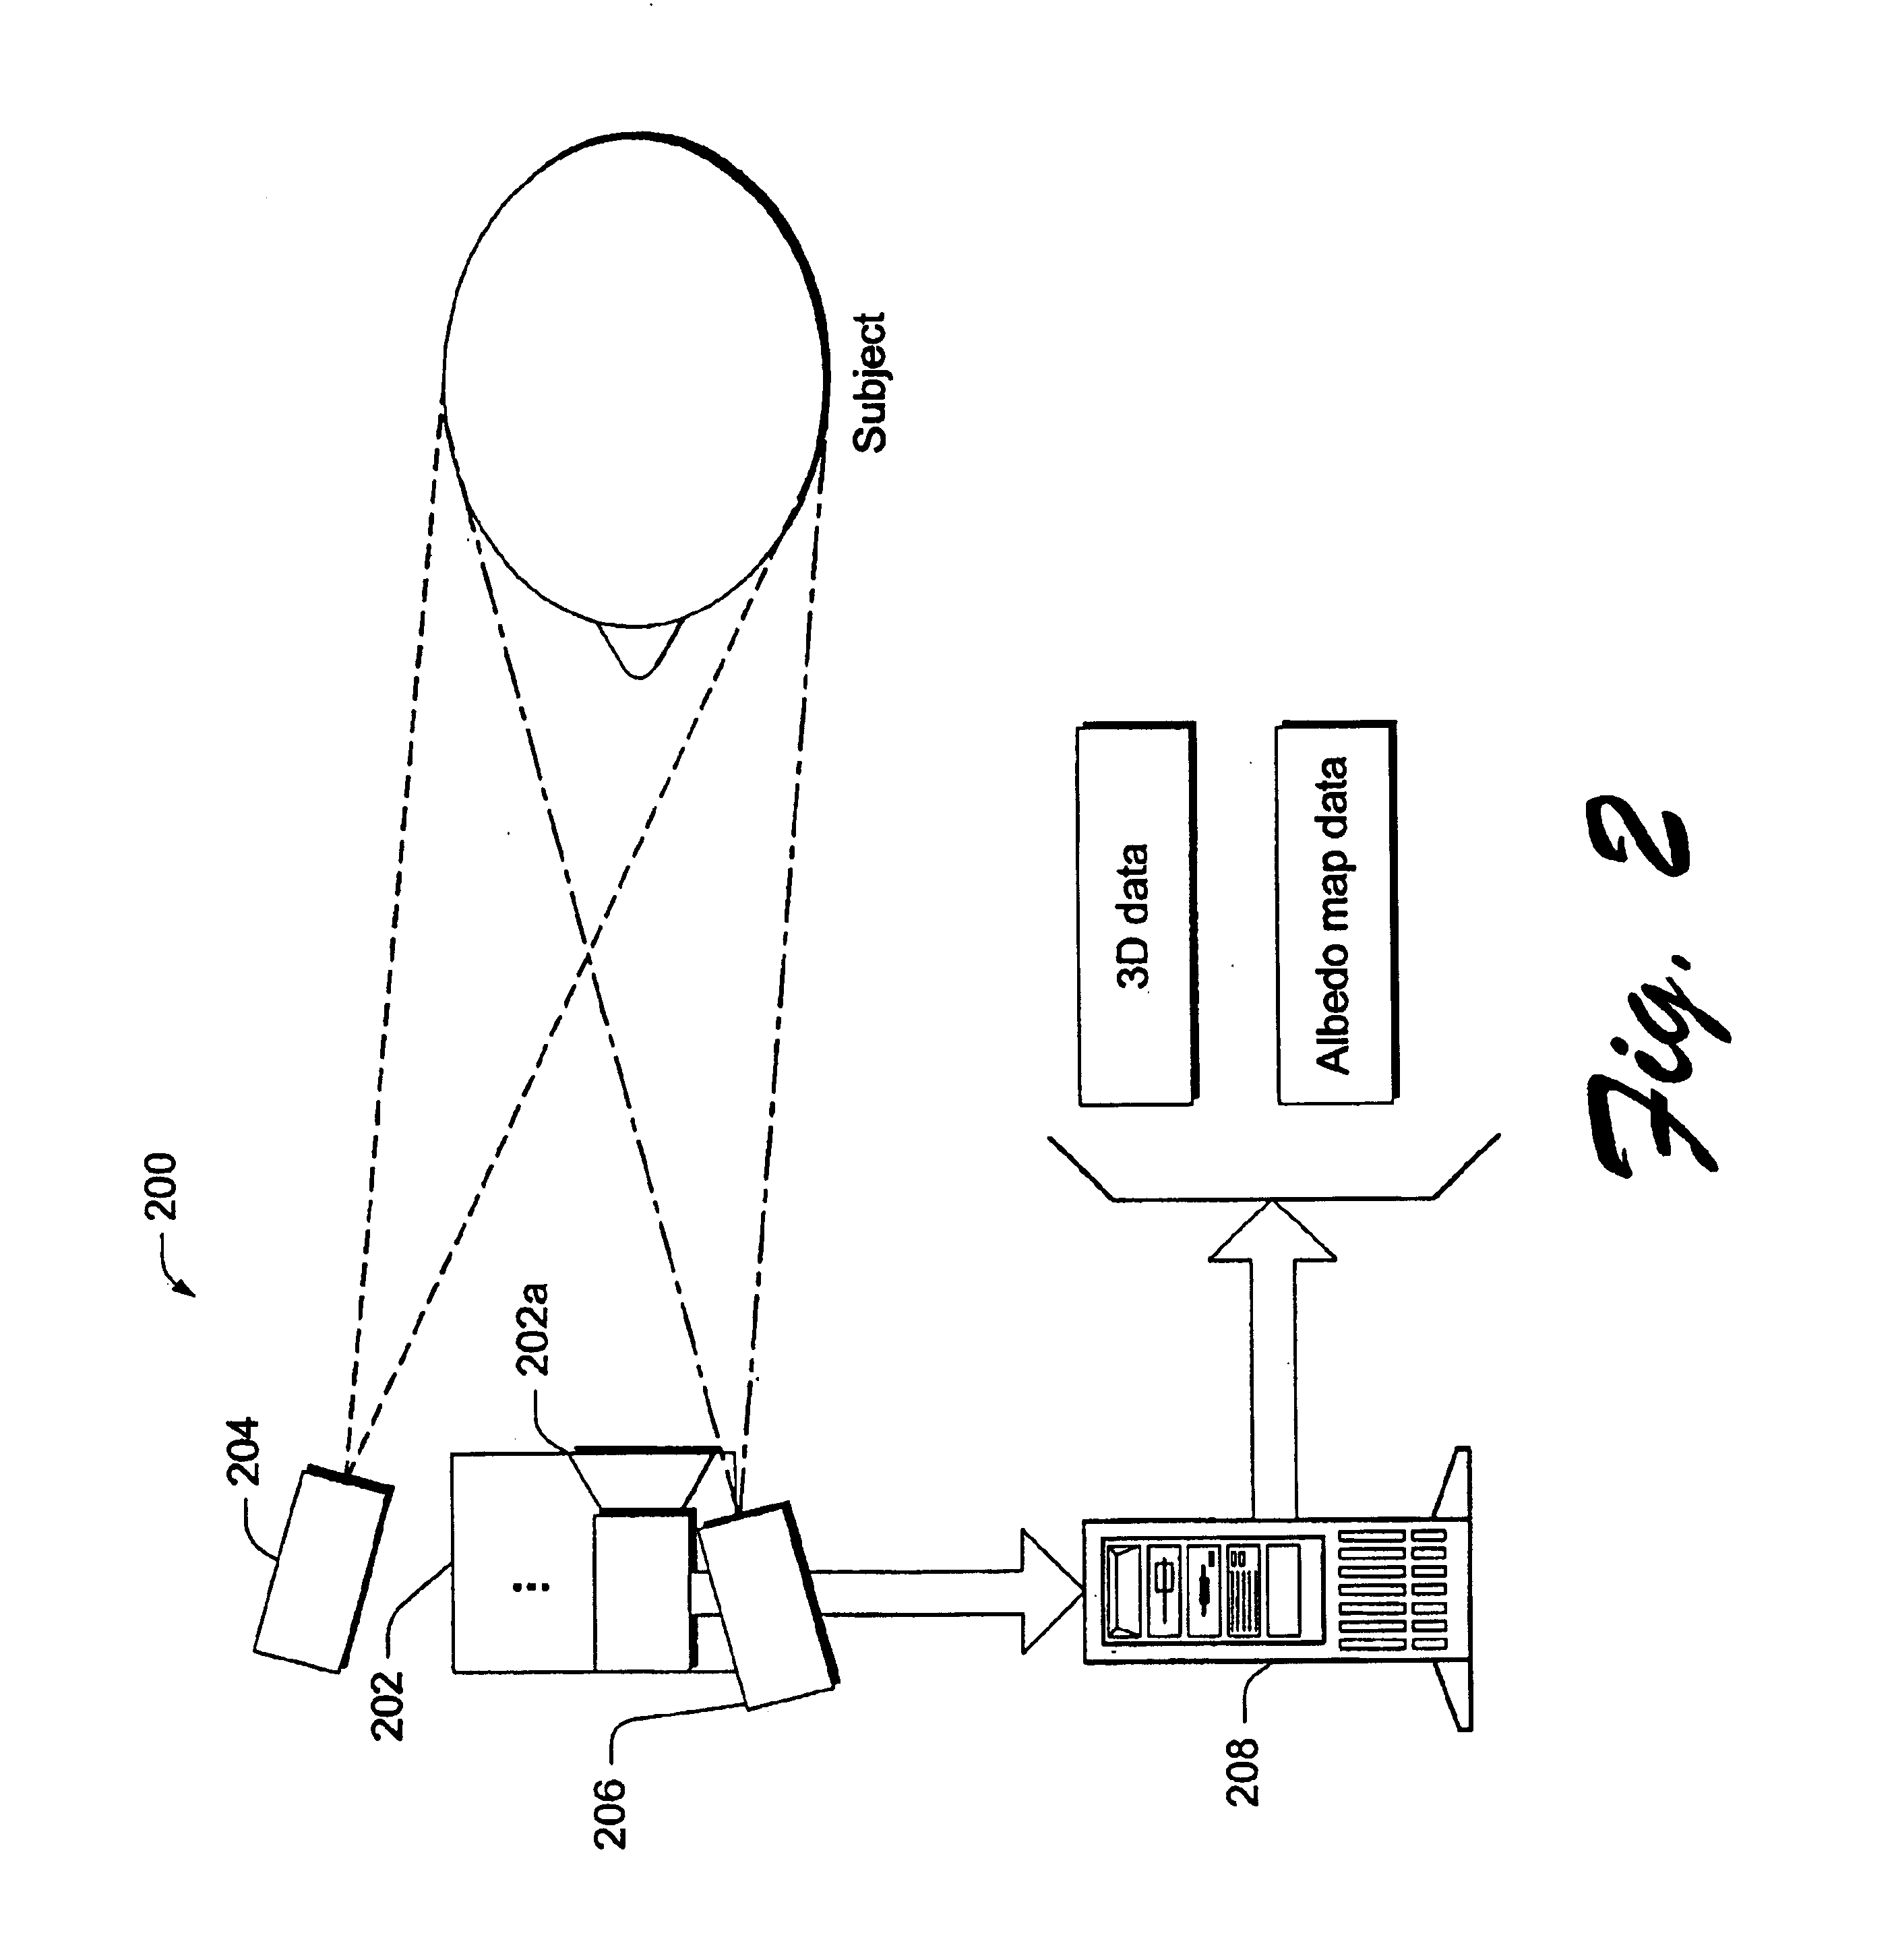 Facial image processing methods and systems